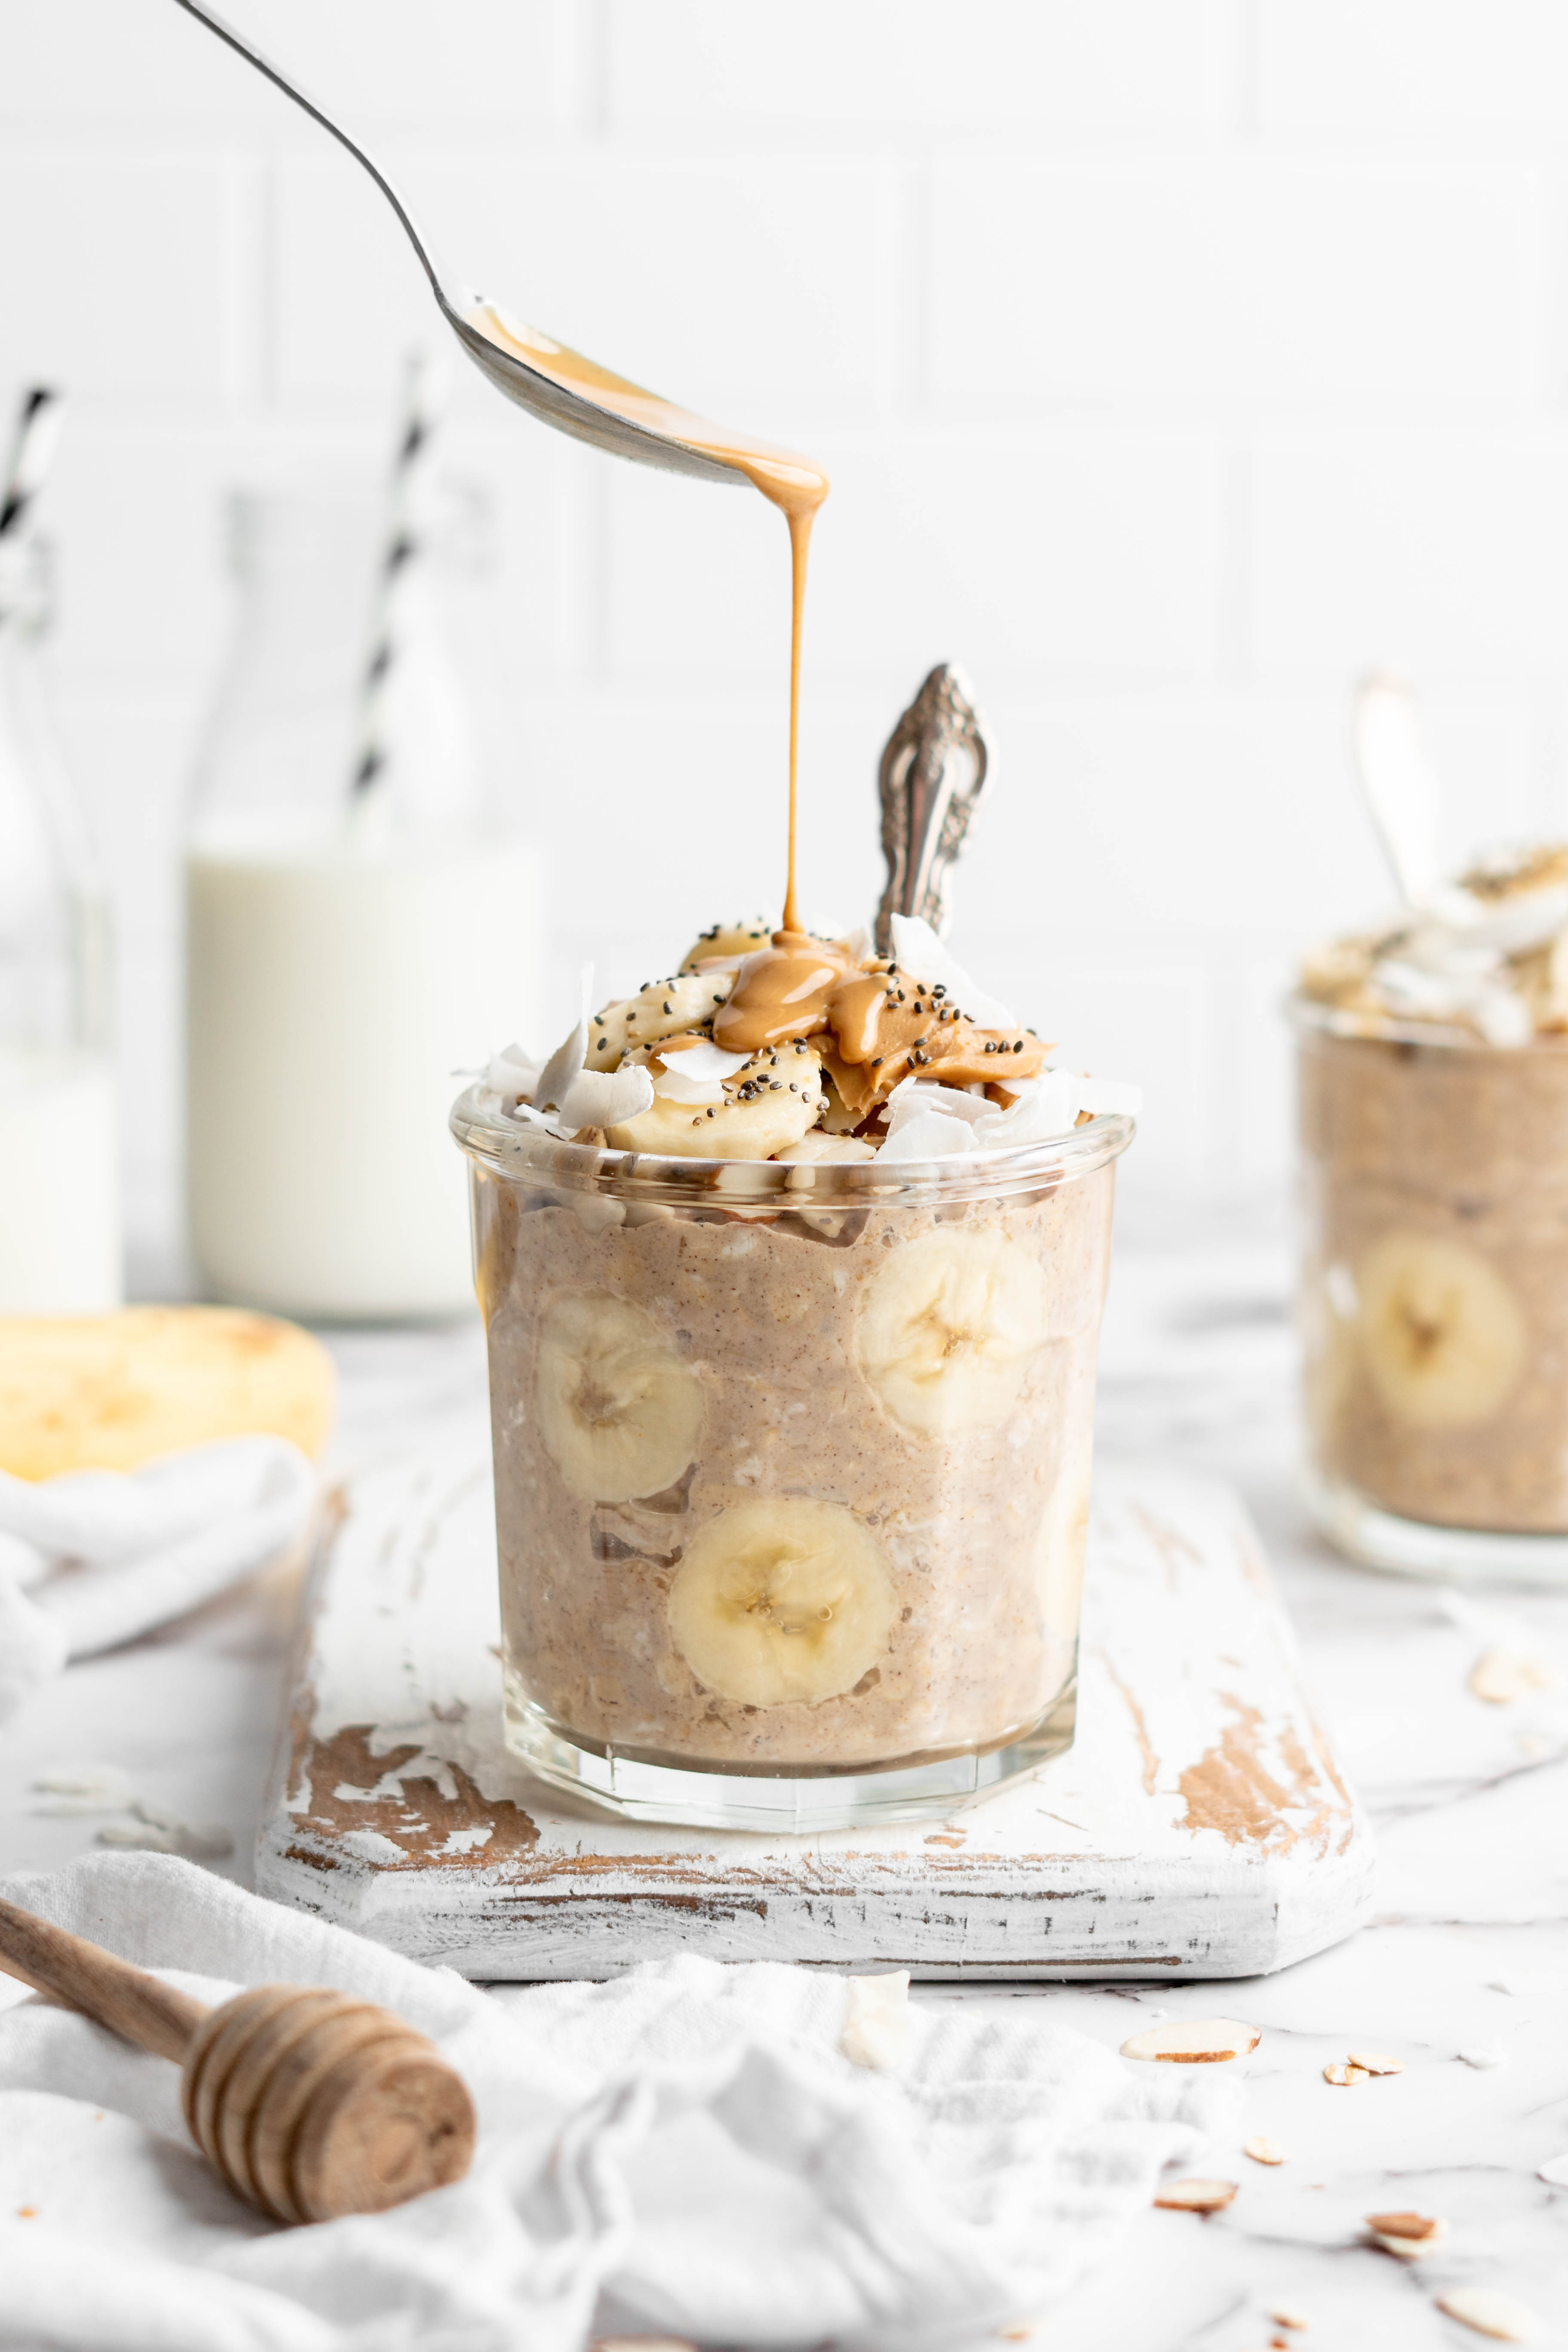 Spooning peanut butter over jar of overnight oats with bananas